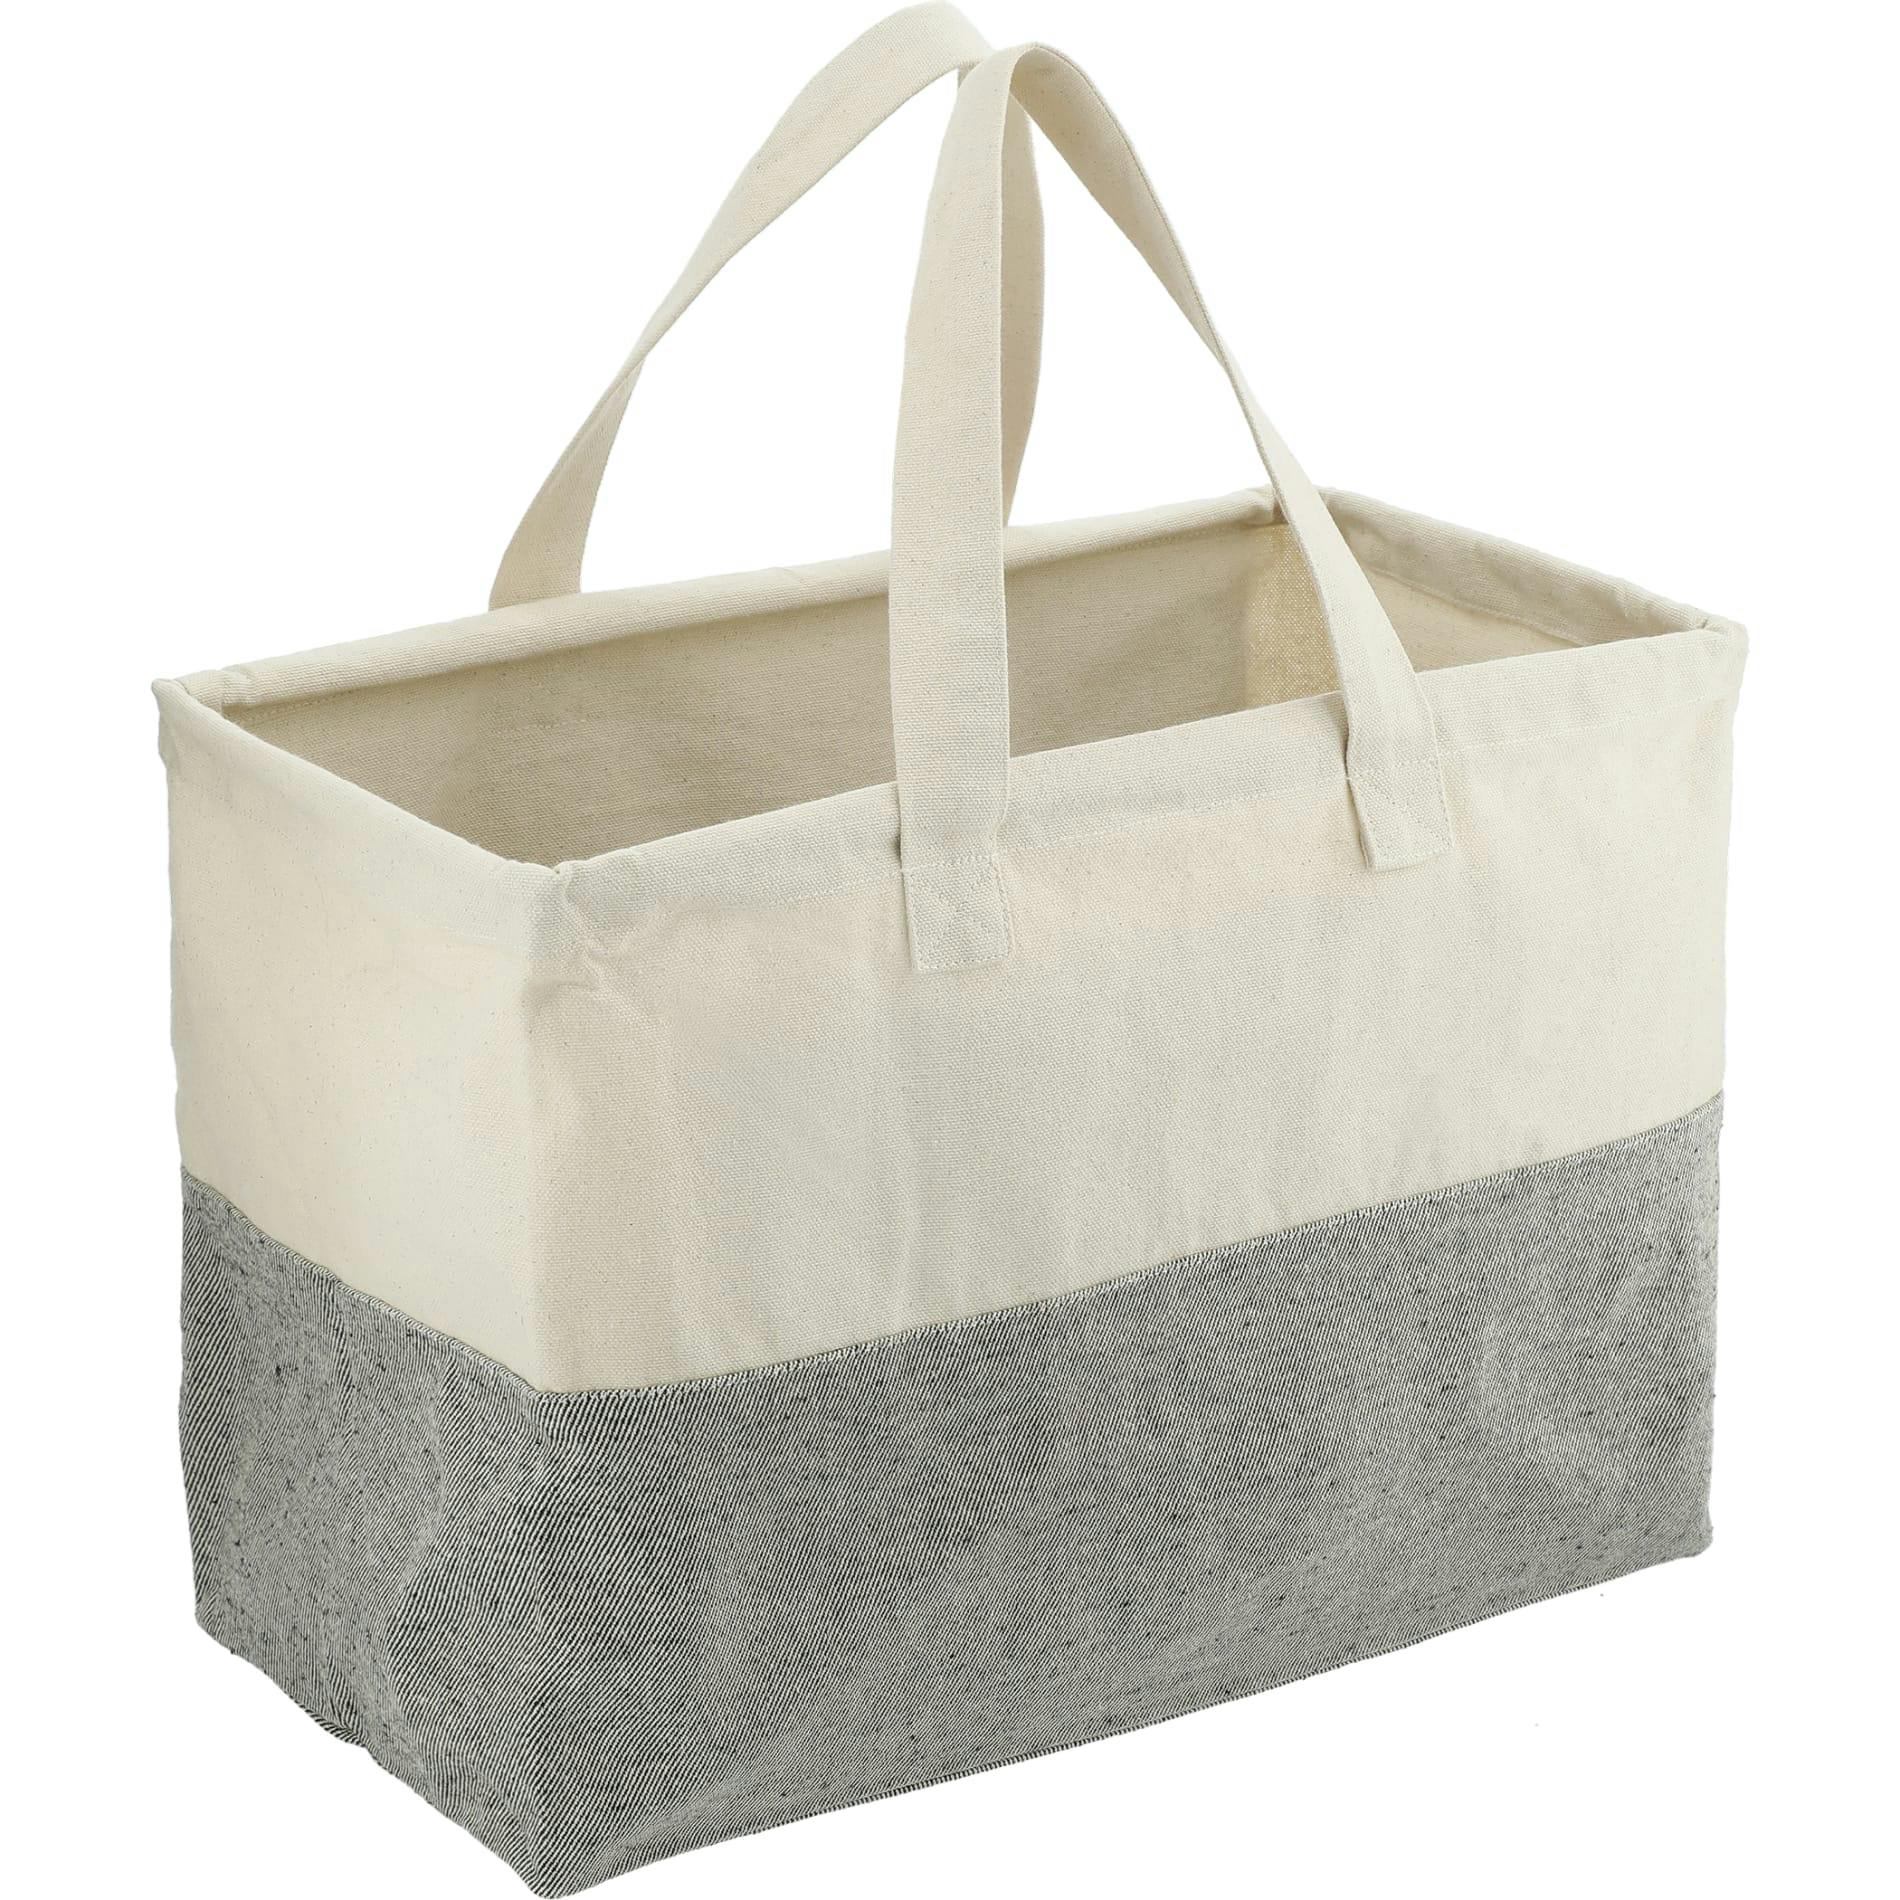 Recycled Cotton Utility Tote - additional Image 6